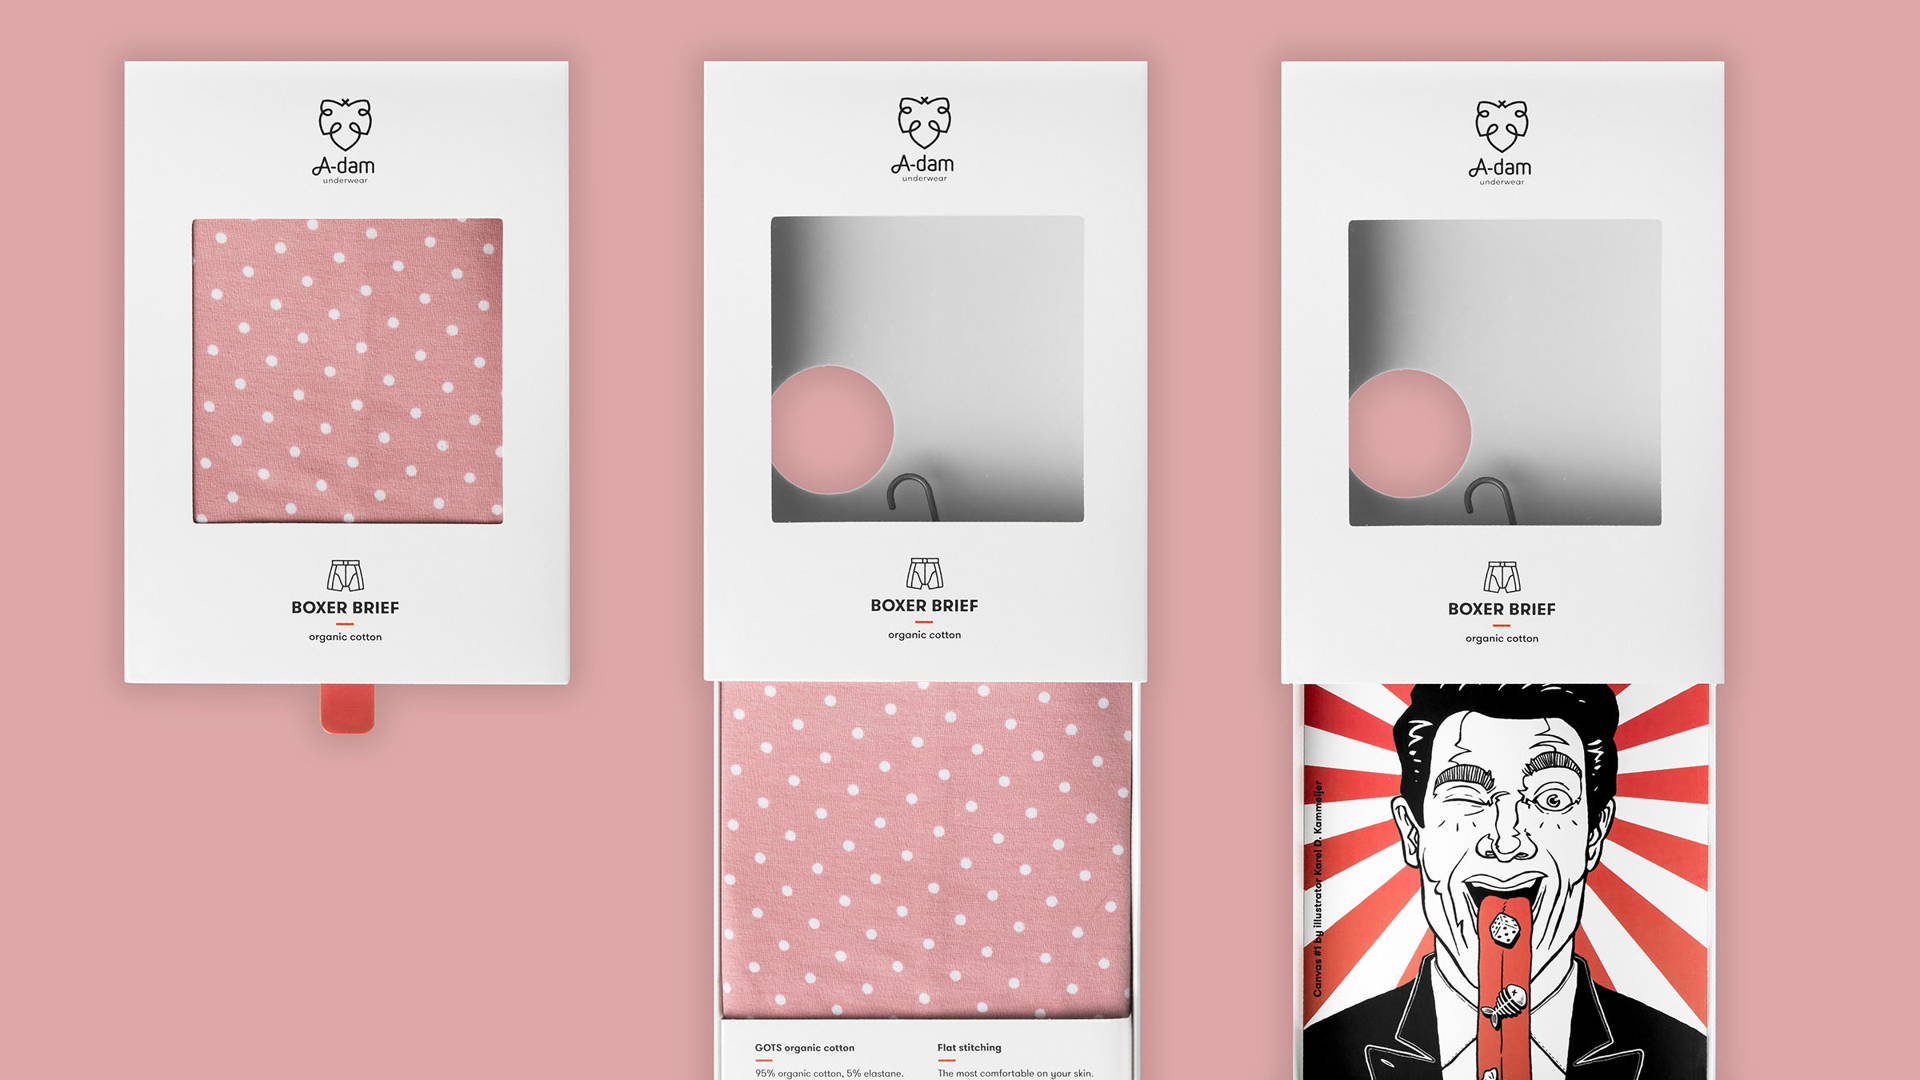 A-dam Underwear Comes With Some Seriously Cheeky Packaging